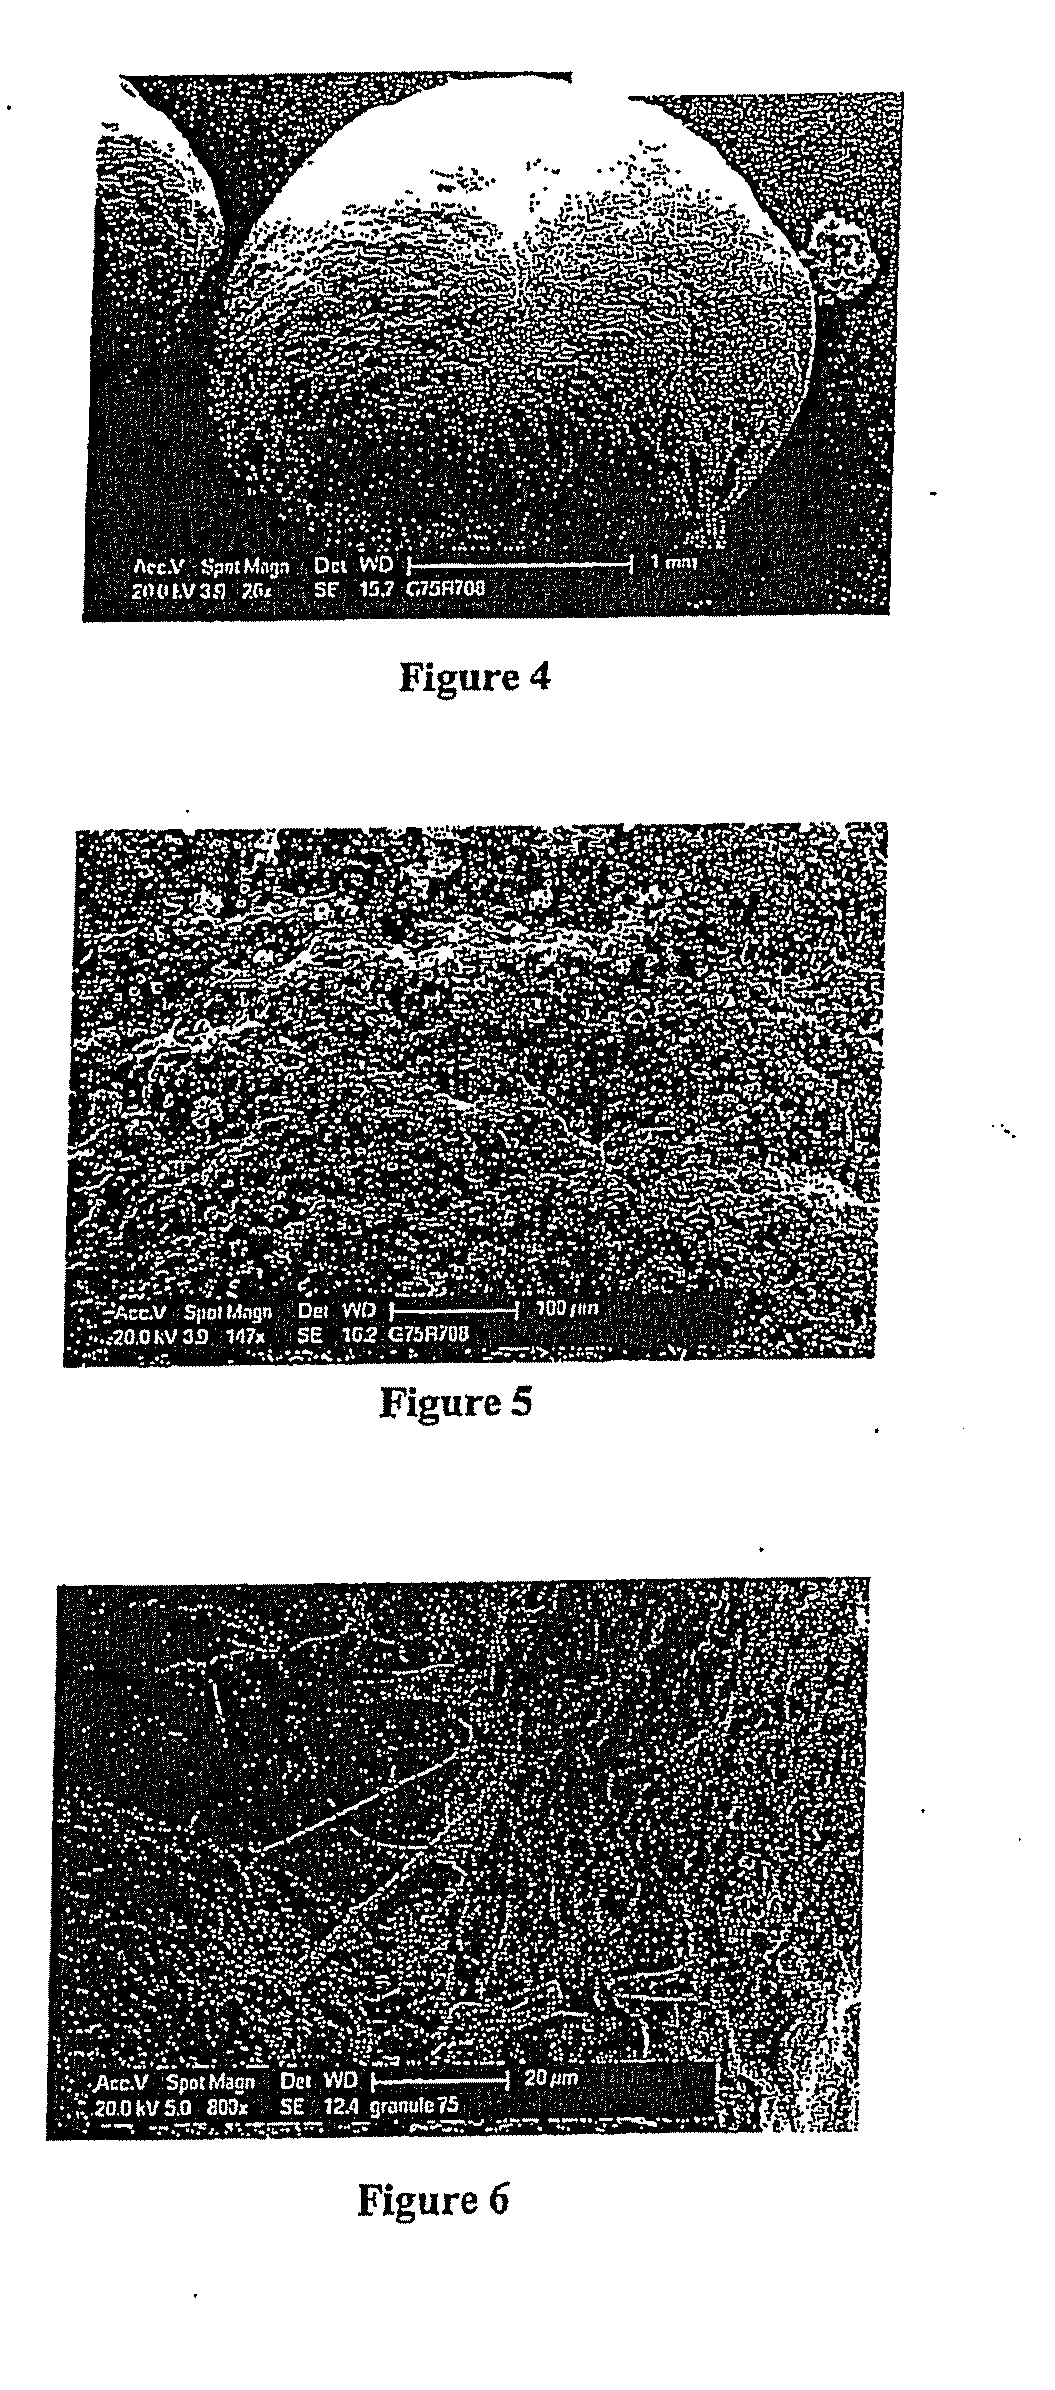 Method for preparing a composite material, resulting material and use thereof